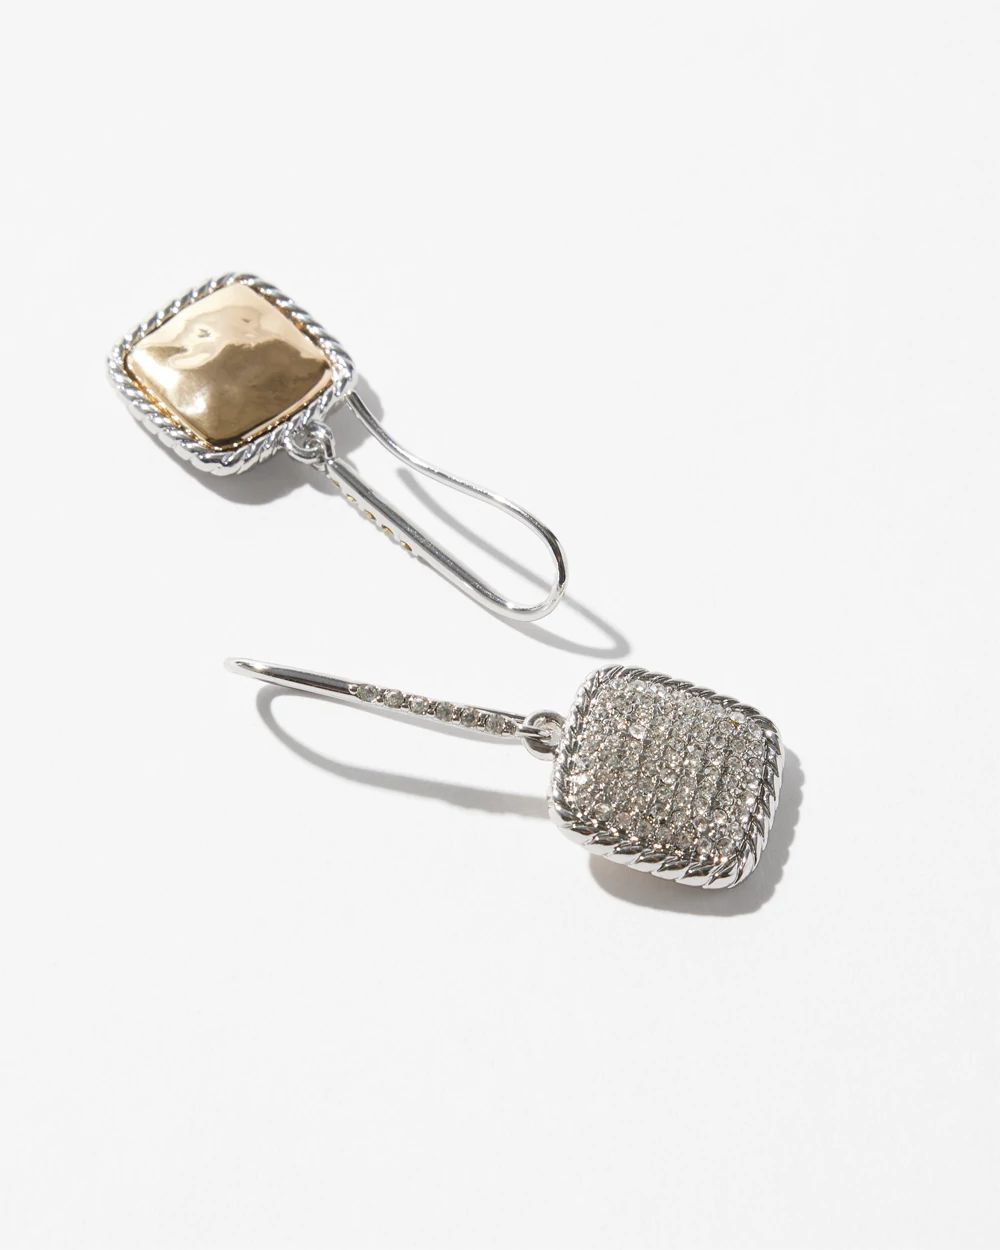 Silver Pave Square Earrings